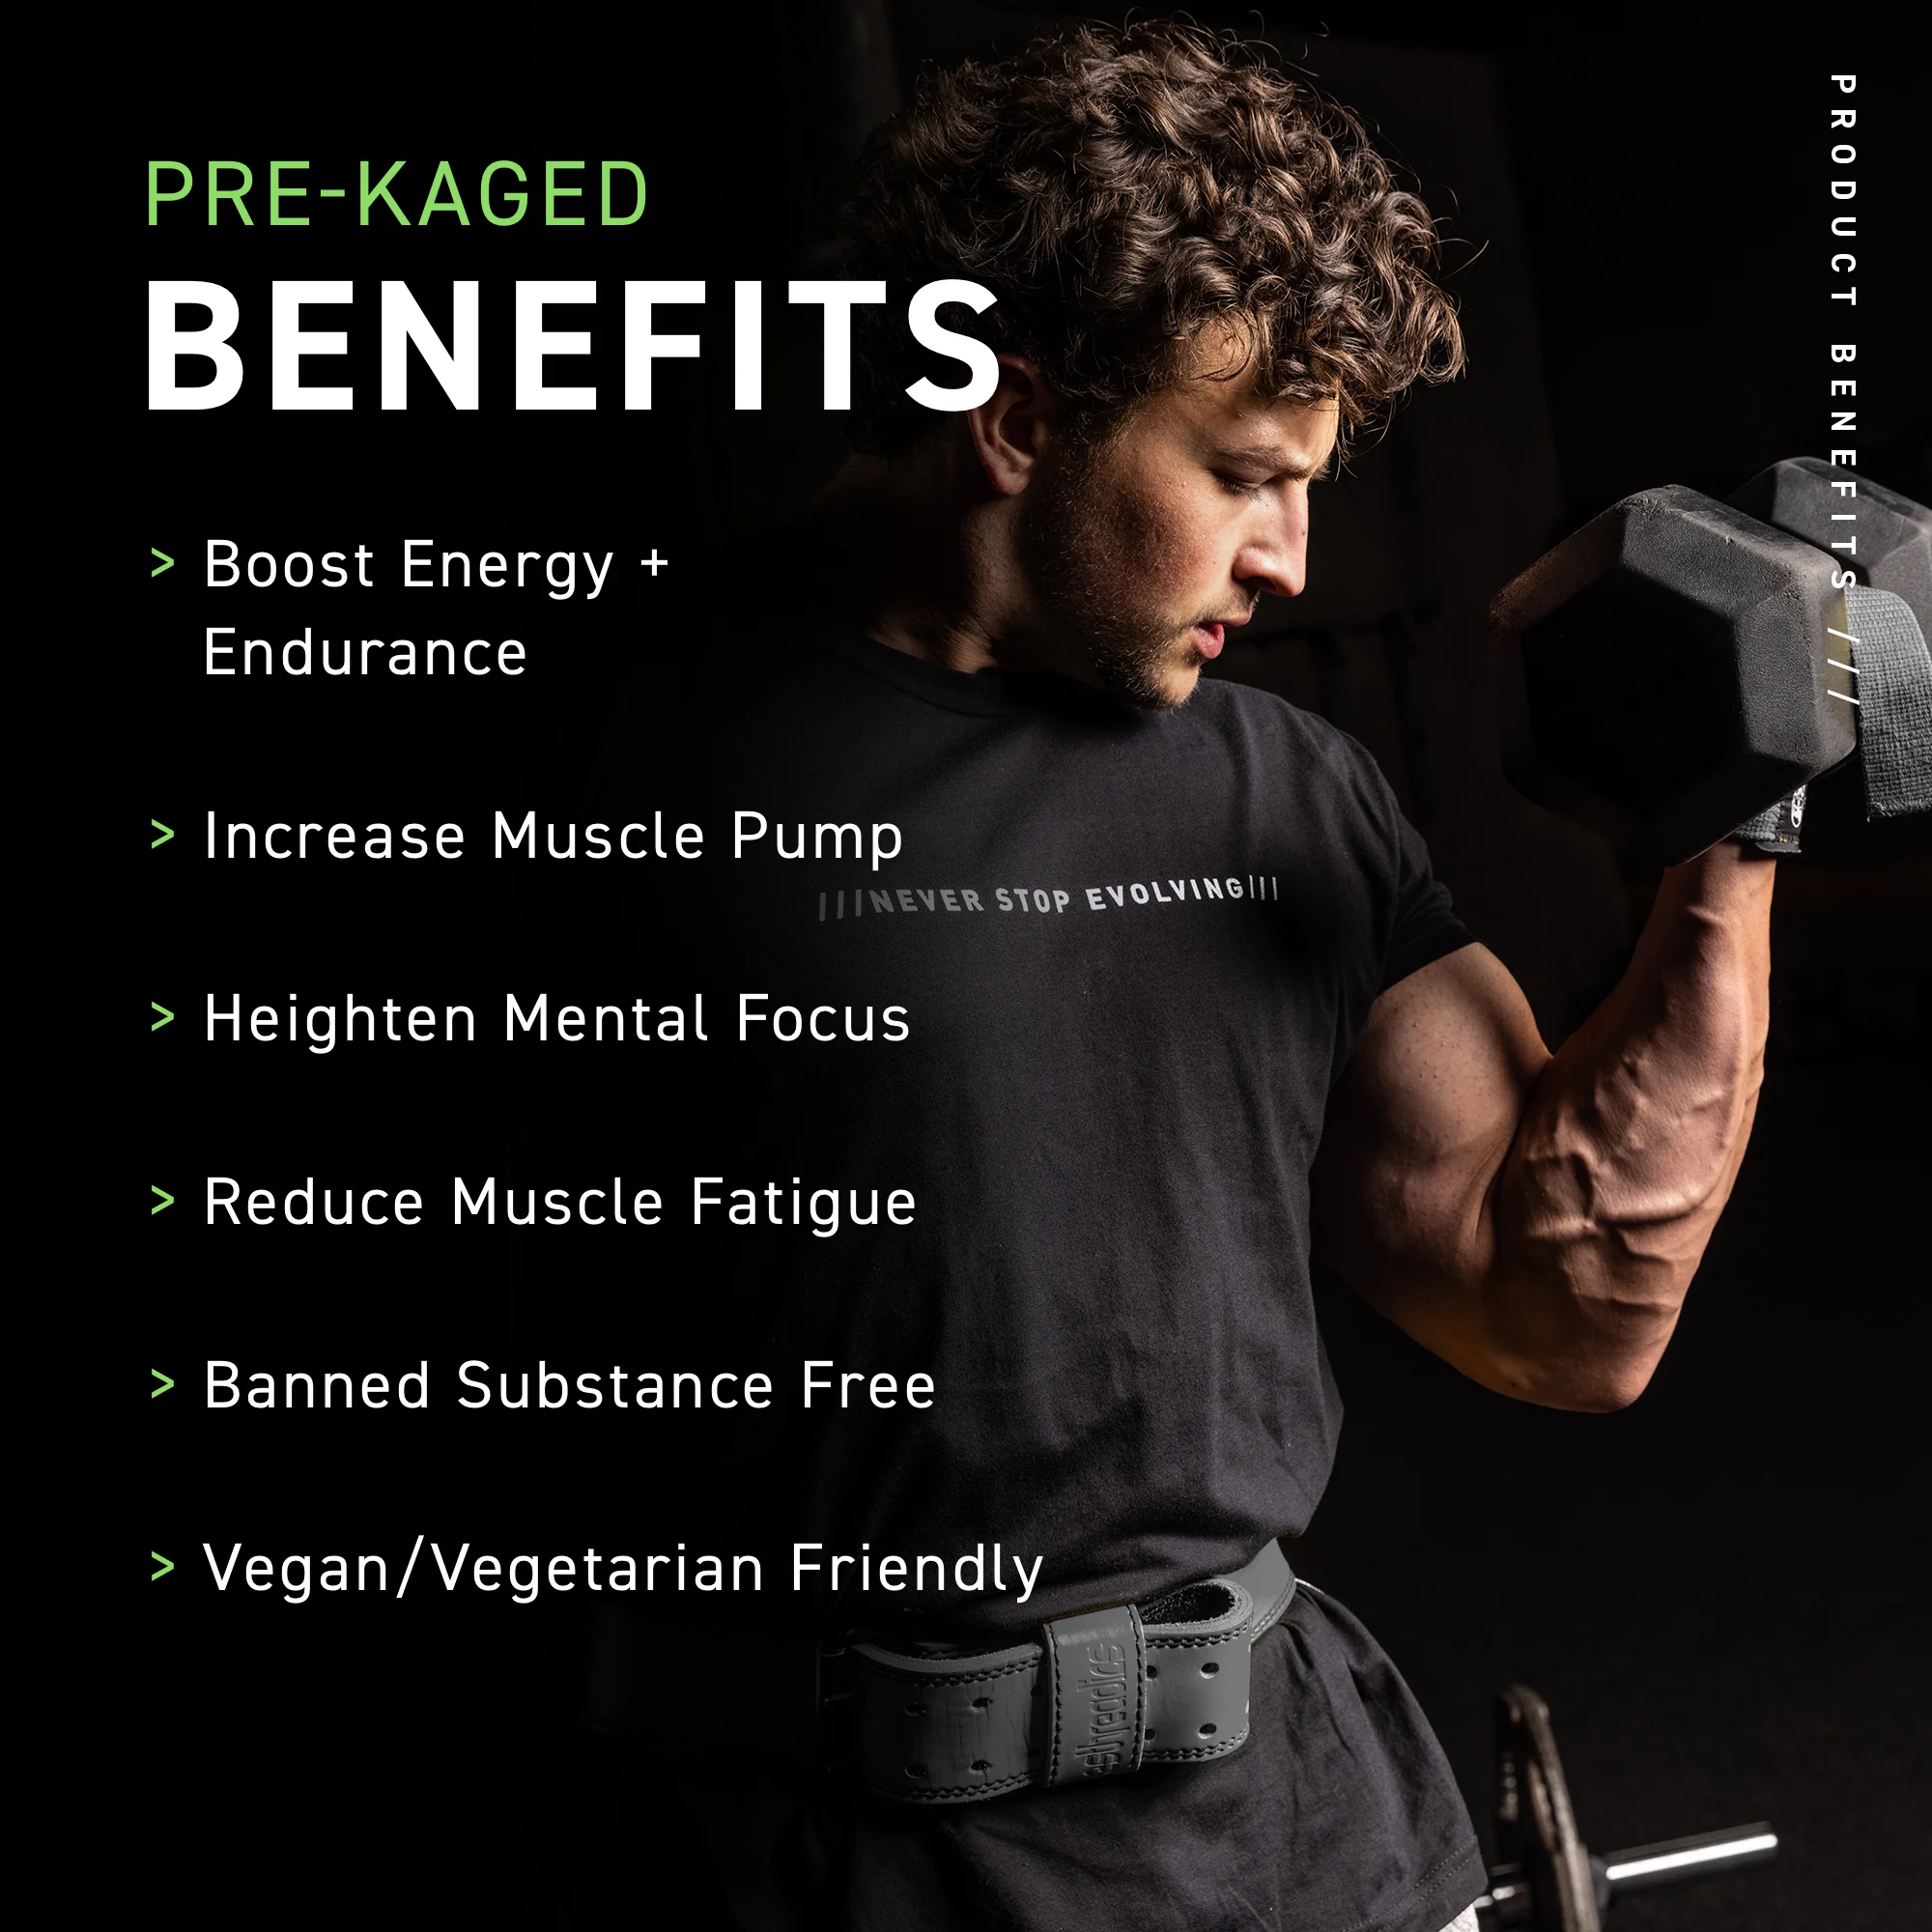 KAGED MUSCLE PRE KAGED 560g